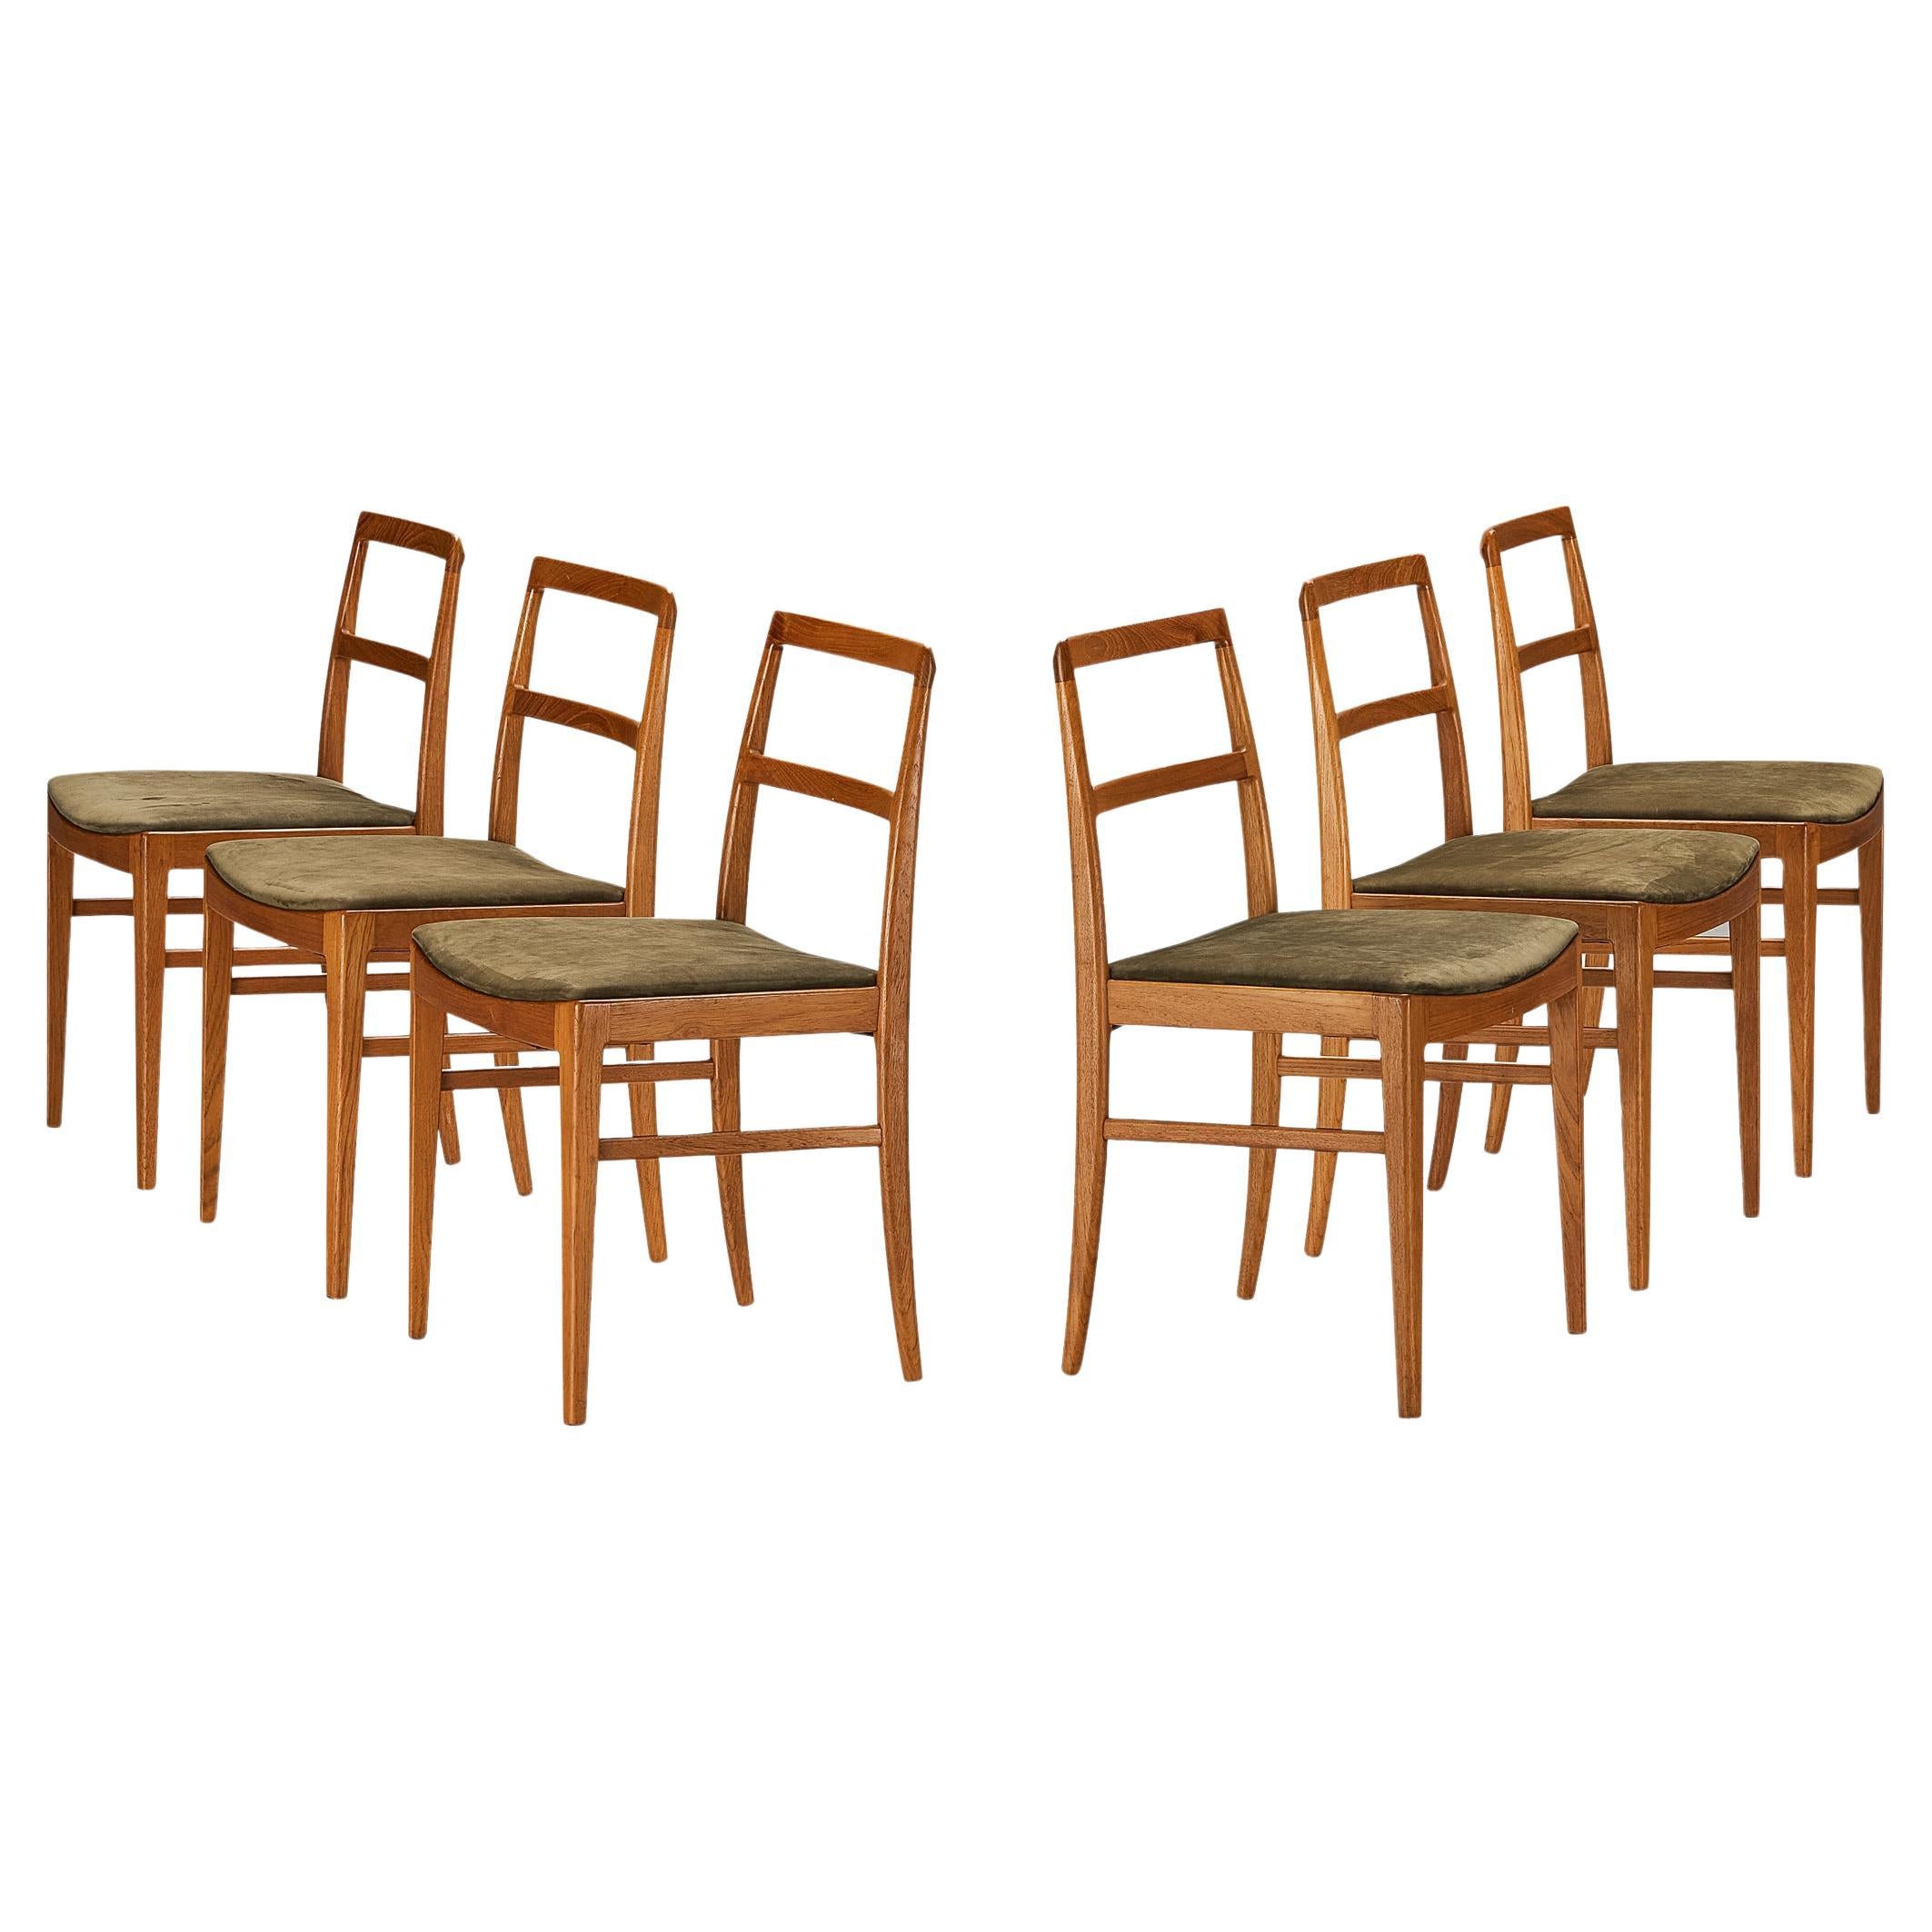 Arne Vodder Set of Six Dining Chairs in Teak and Green Upholstery 